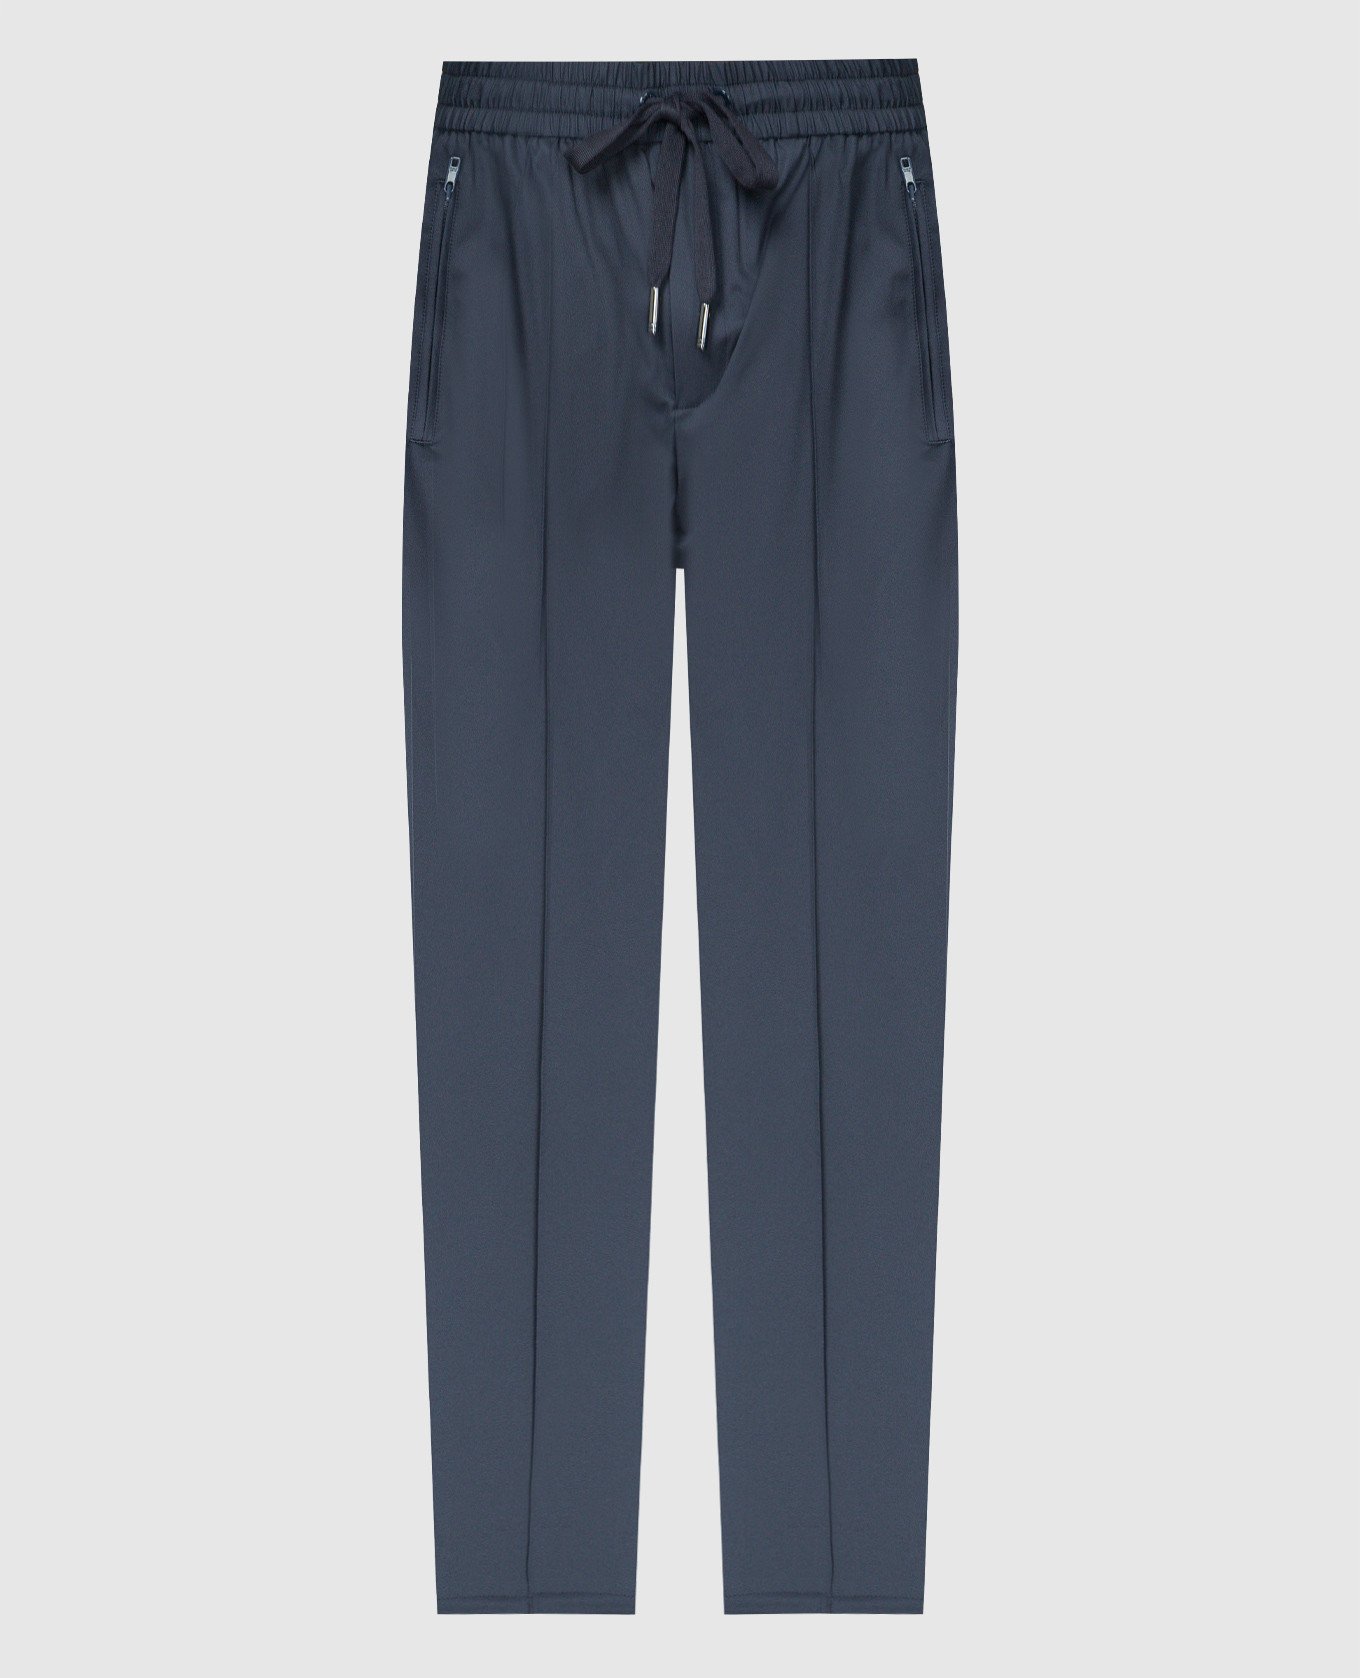 Blue sweatpants with logo patch